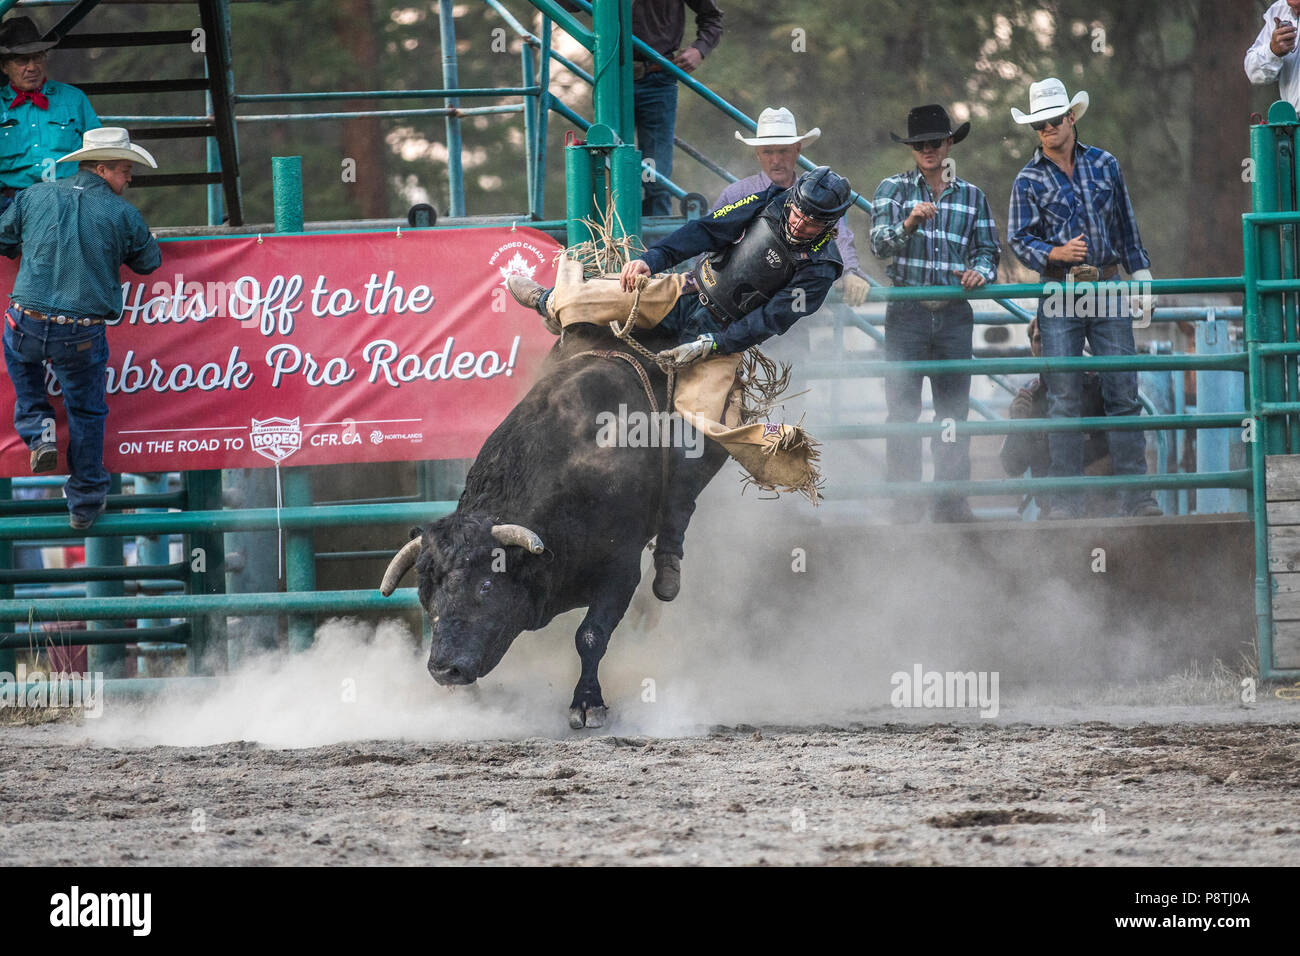 Bull Riding, rodeo's most exciting and dangerous sport. Huge bulls trying to throw the cowboys from there back. Cranbrook, BC, Canada. Stock Photo